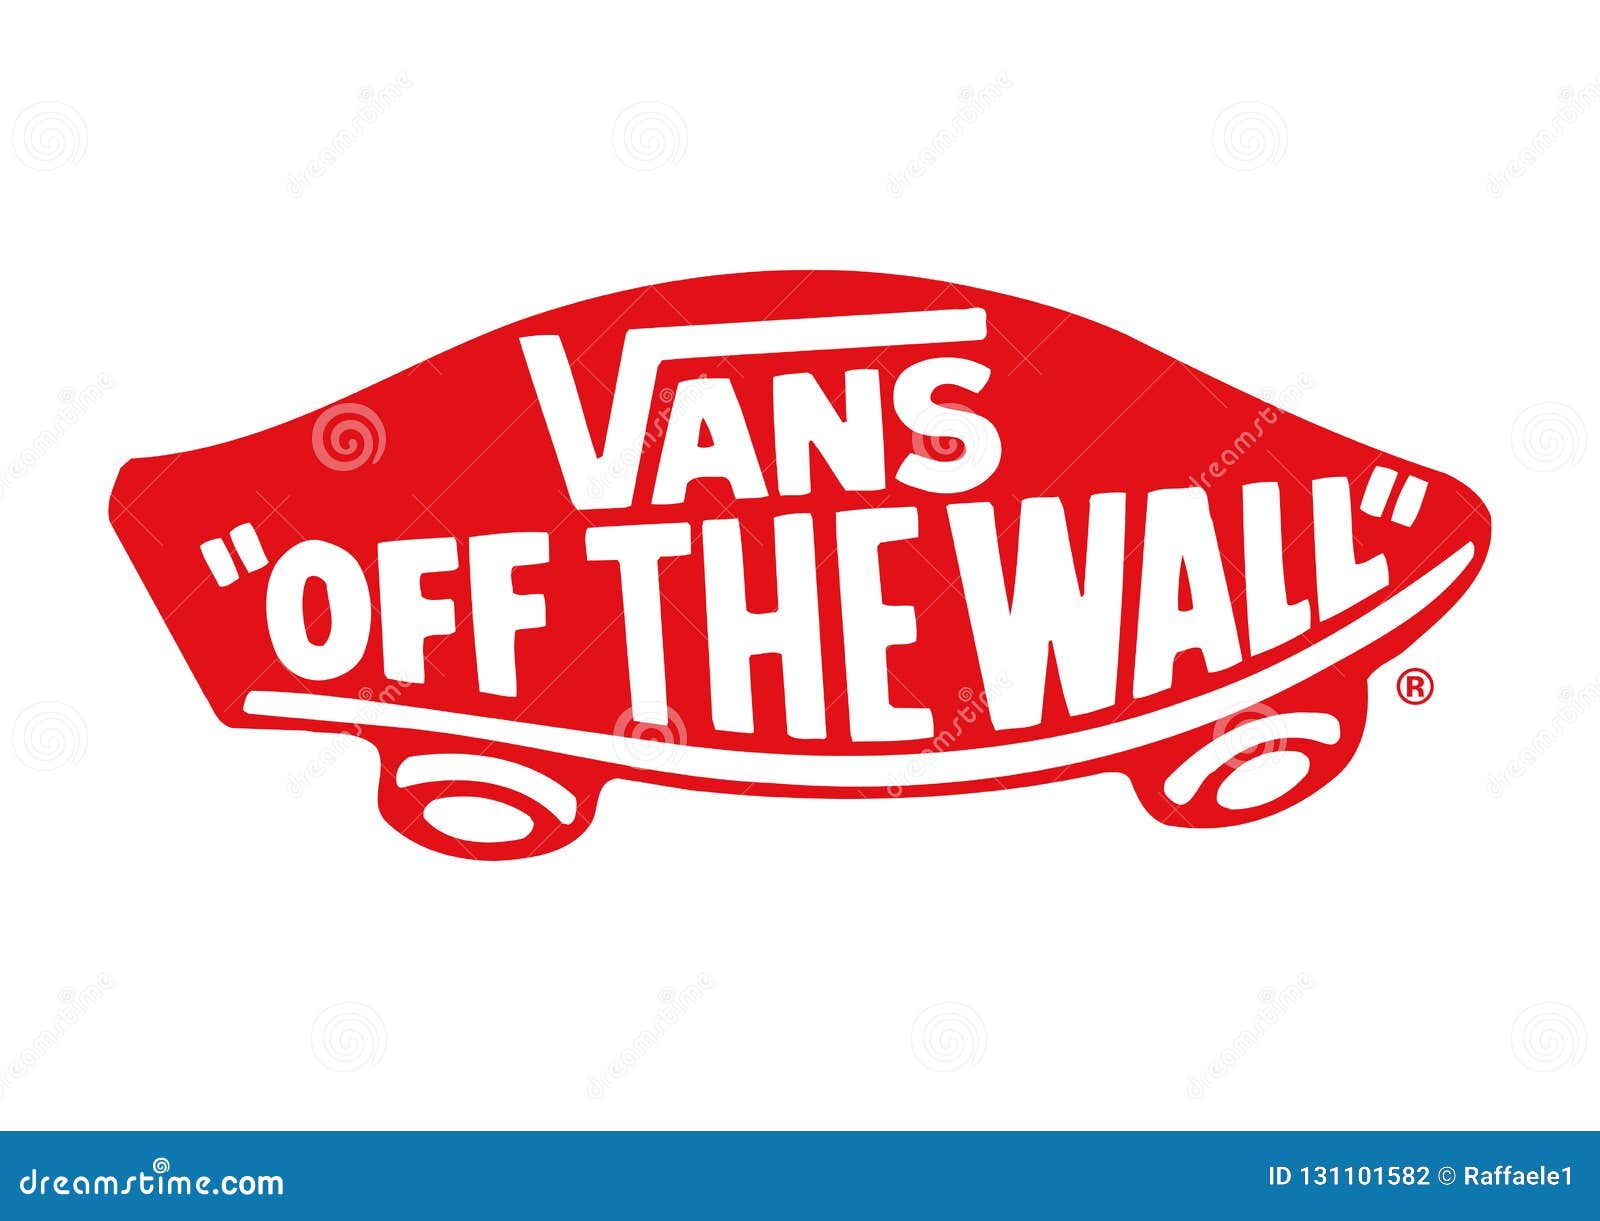 vans this is off the wall